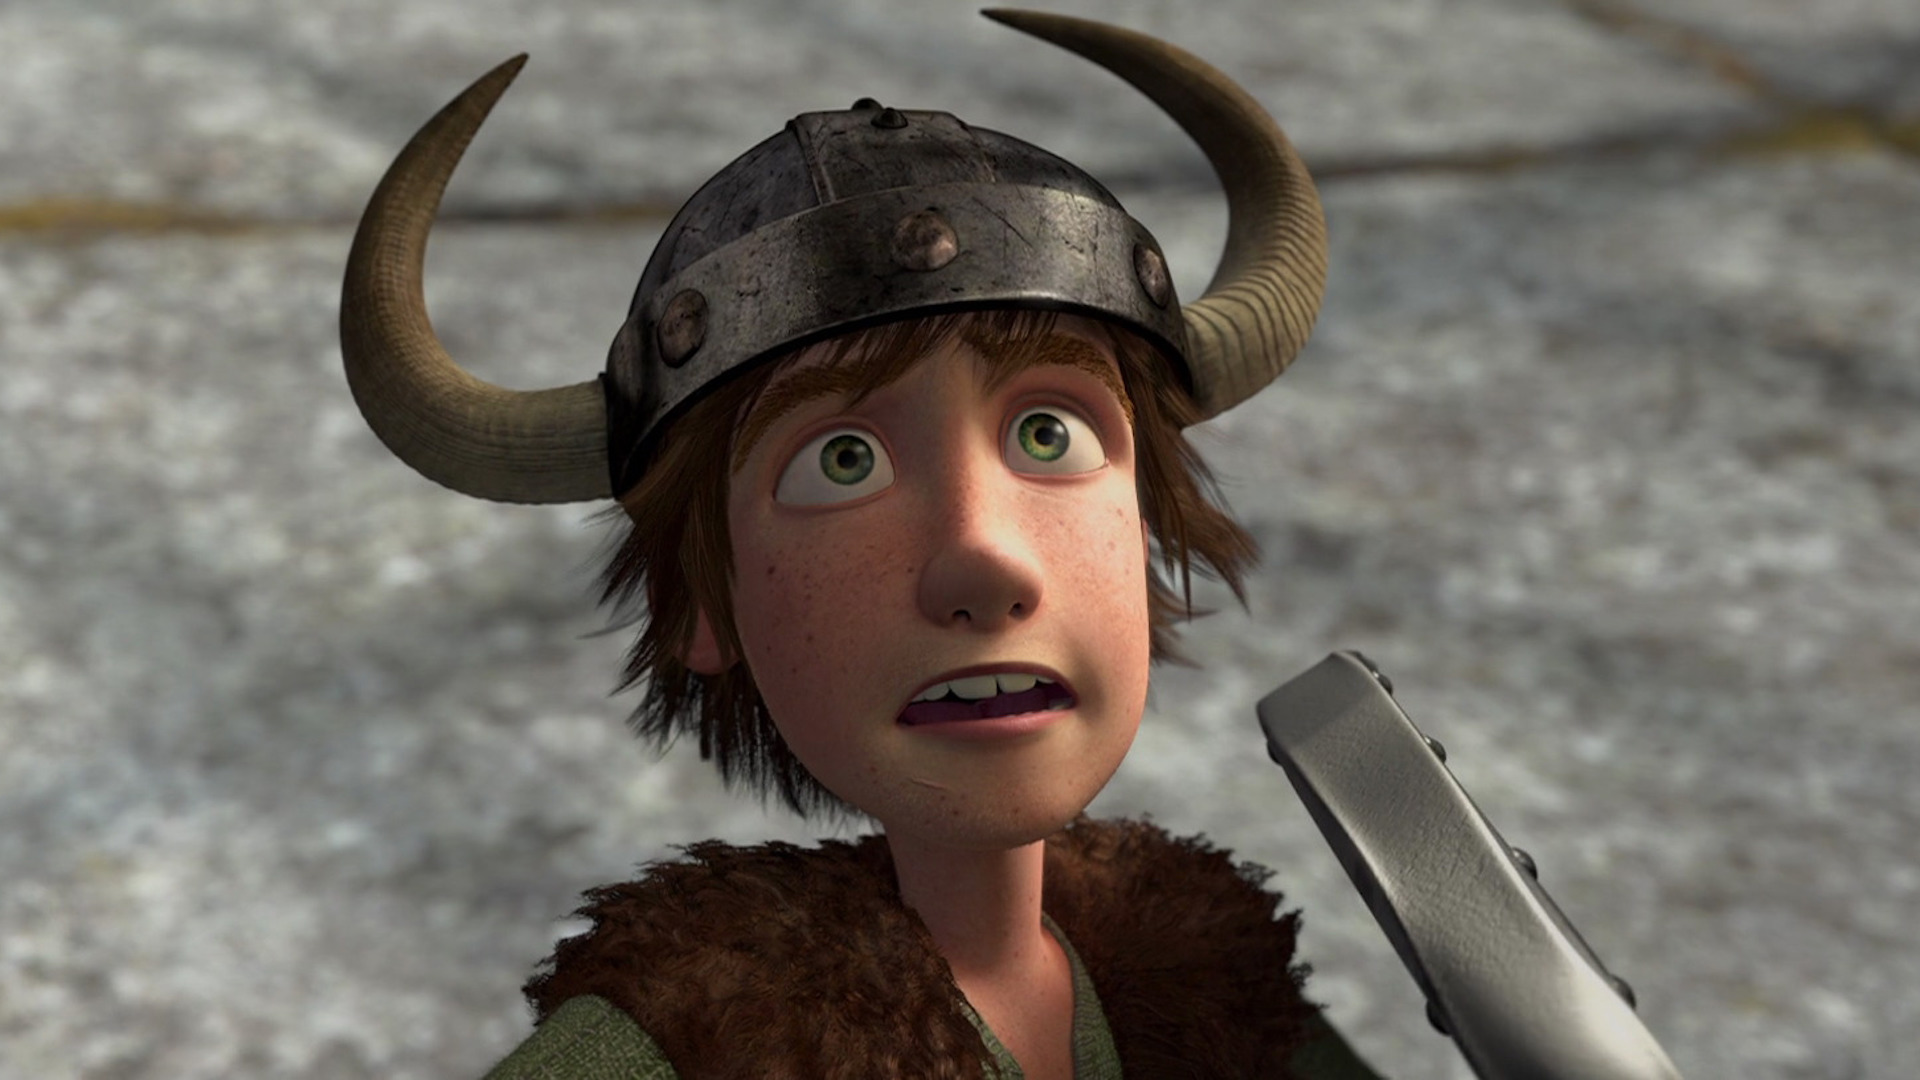 Hiccup in How to Train Your Dragon